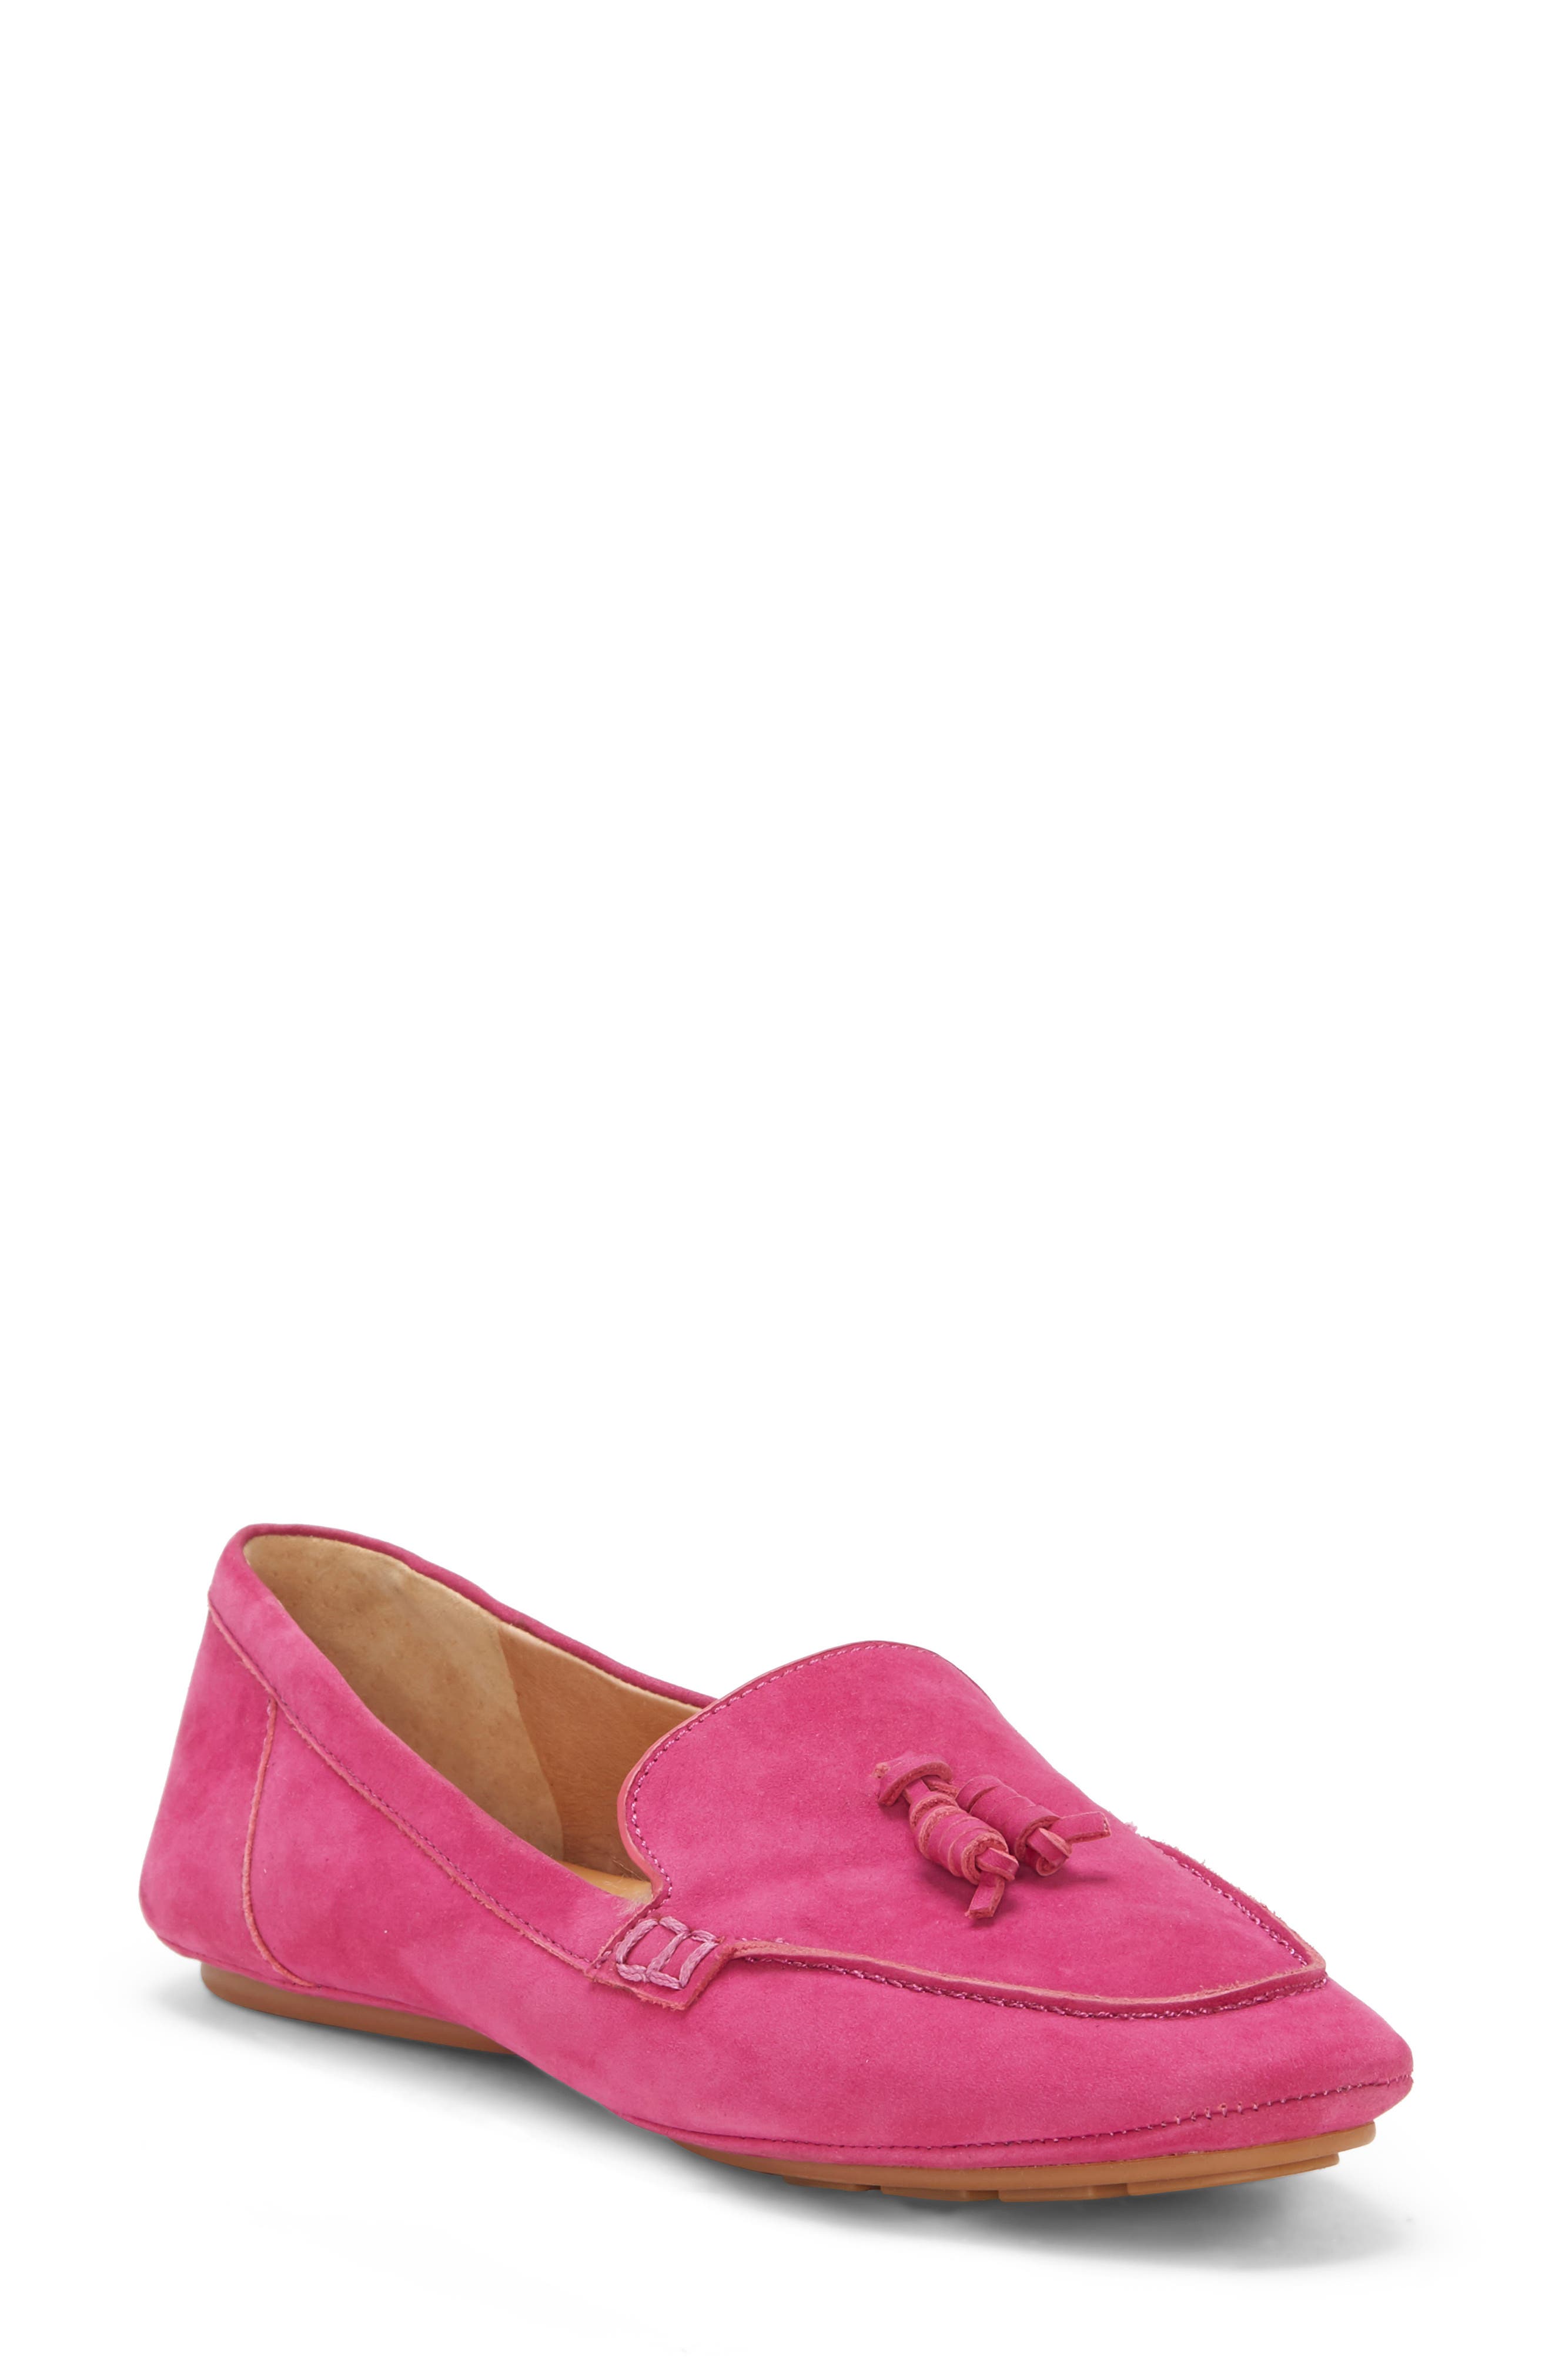 hot pink loafers womens